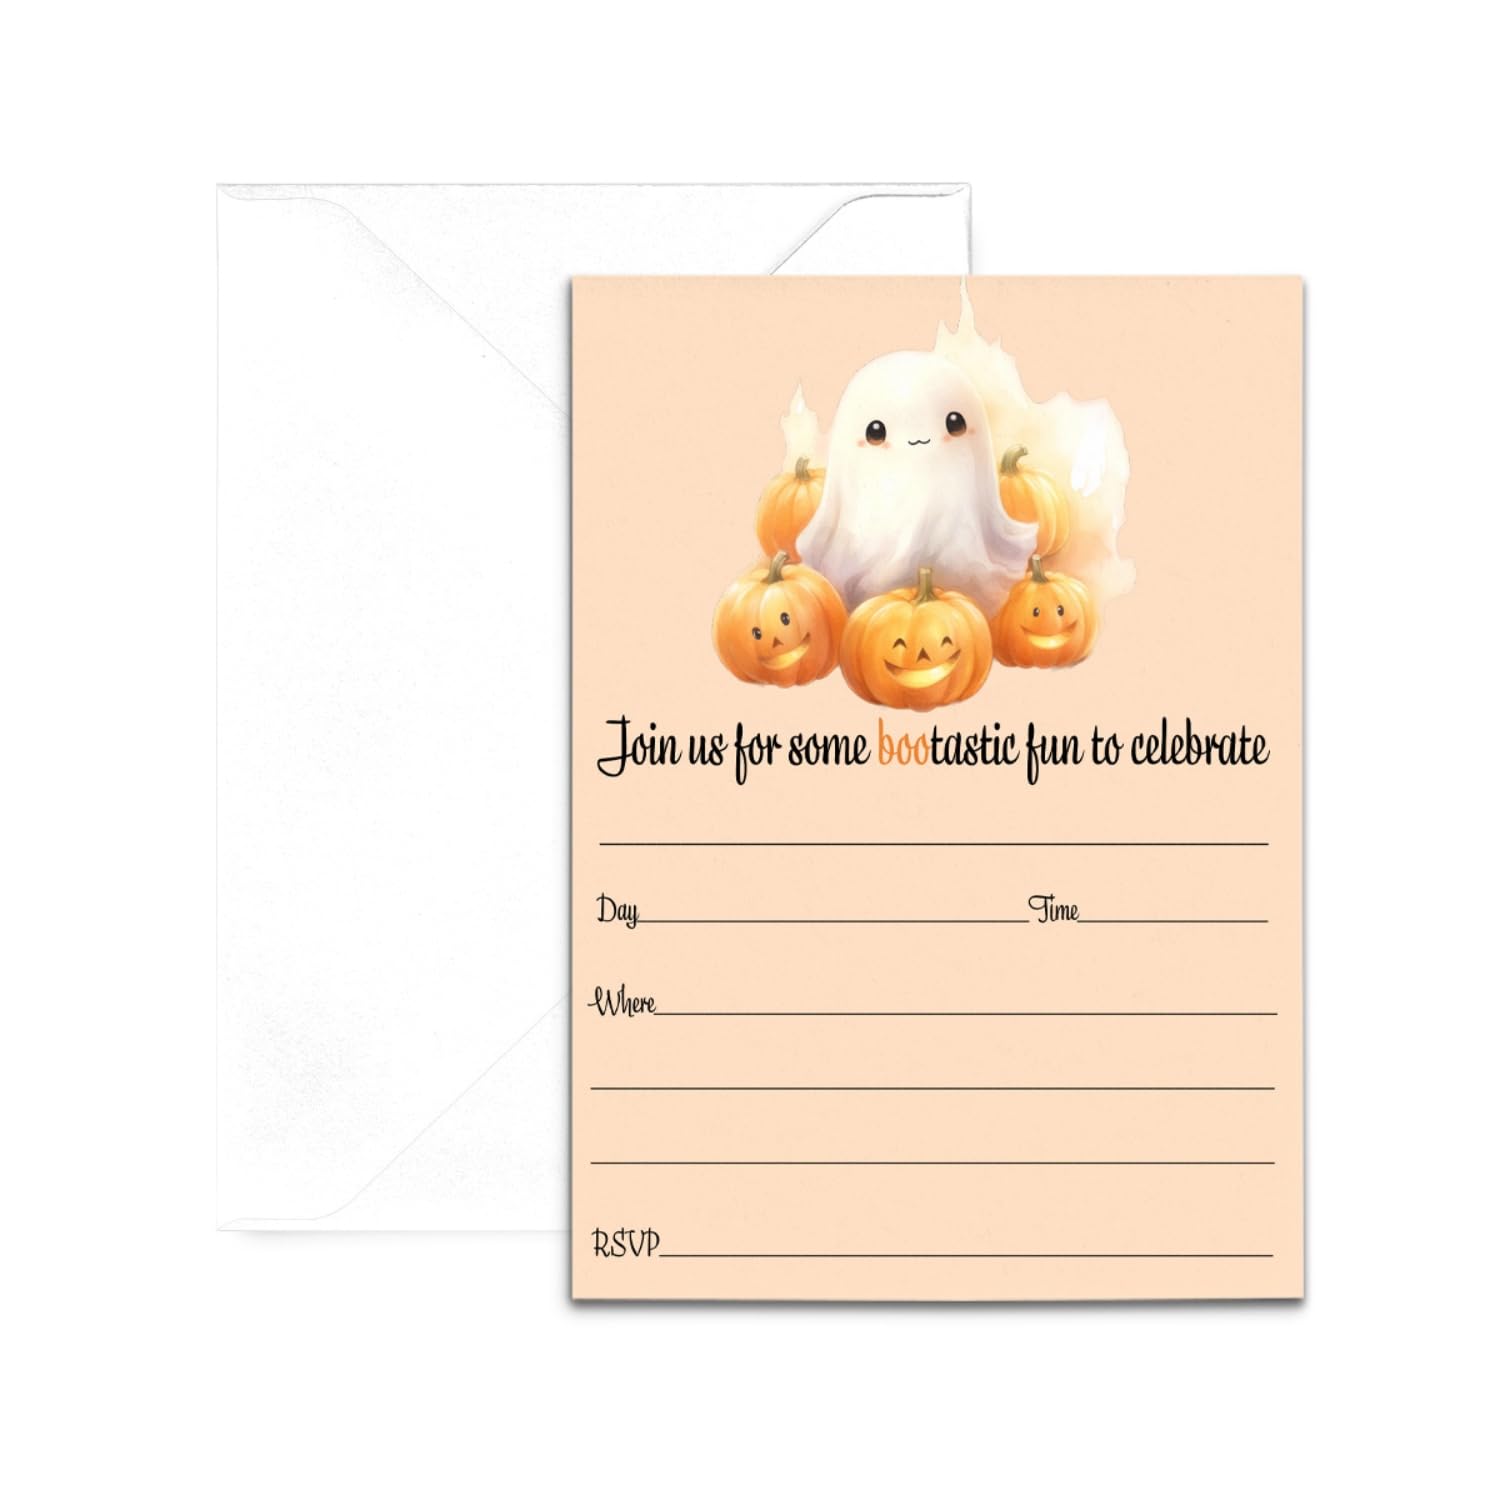 Envelopes 25 Guests - Blank Ghost Invites Pumpkin Baby Shower, Costume Party Kids, Fall Festival, Adults Fill-Paper Clever Party